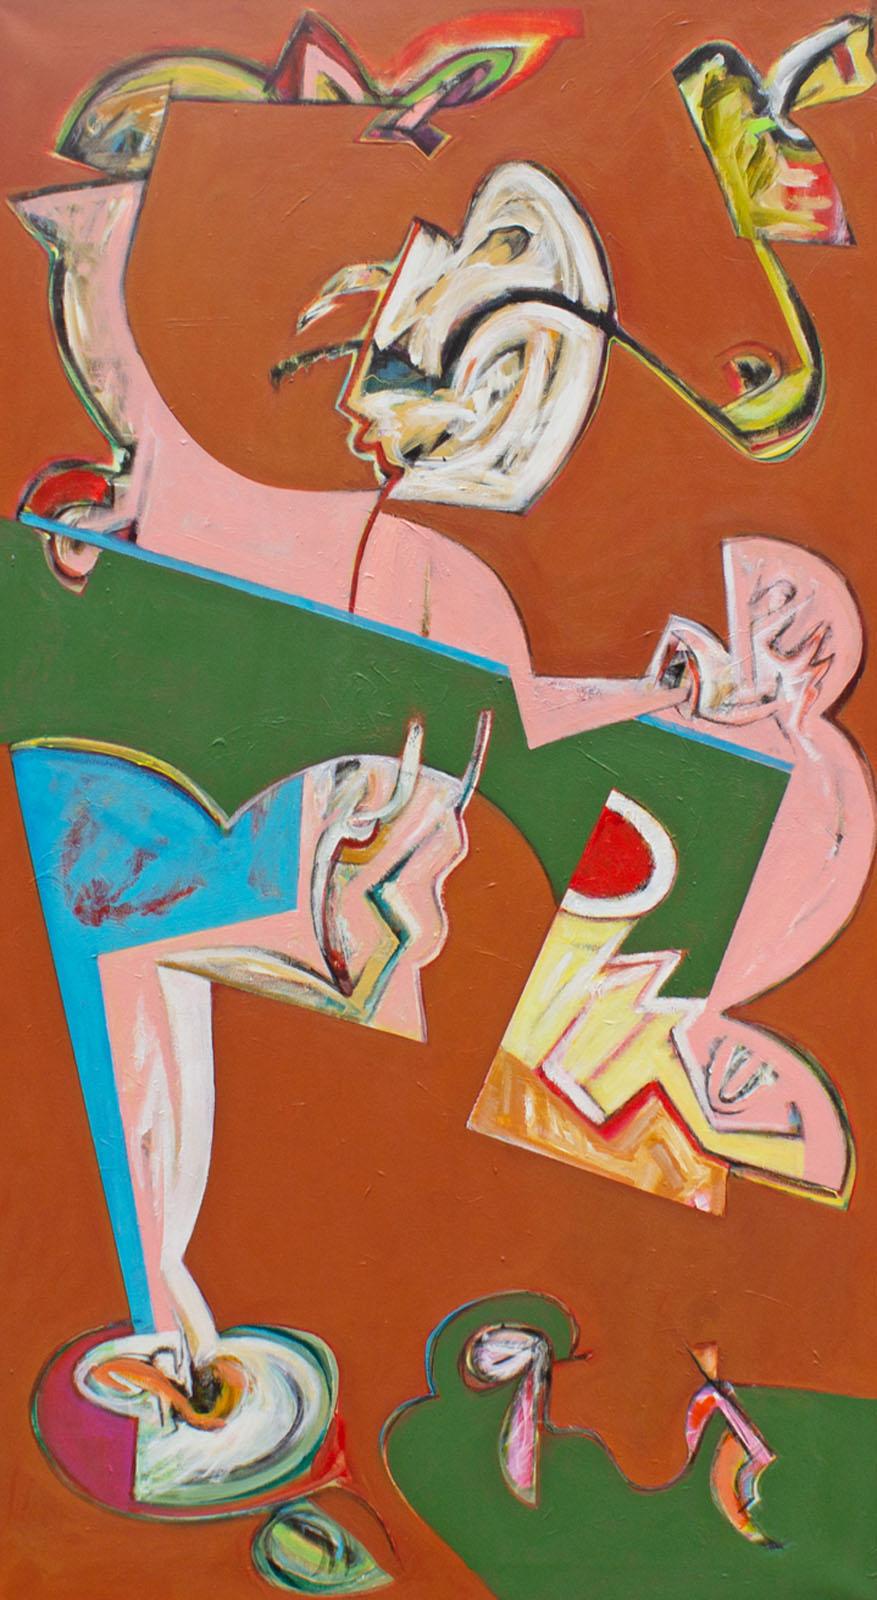 An abstract oil on canvas painting by American artist James L. Bruch (1942-2023). Abstract shapes in pink, blue, yellow, green, and white contrast against the burnt-orange background. The painting is displayed in a brown frame. 

Born in Kenosha,